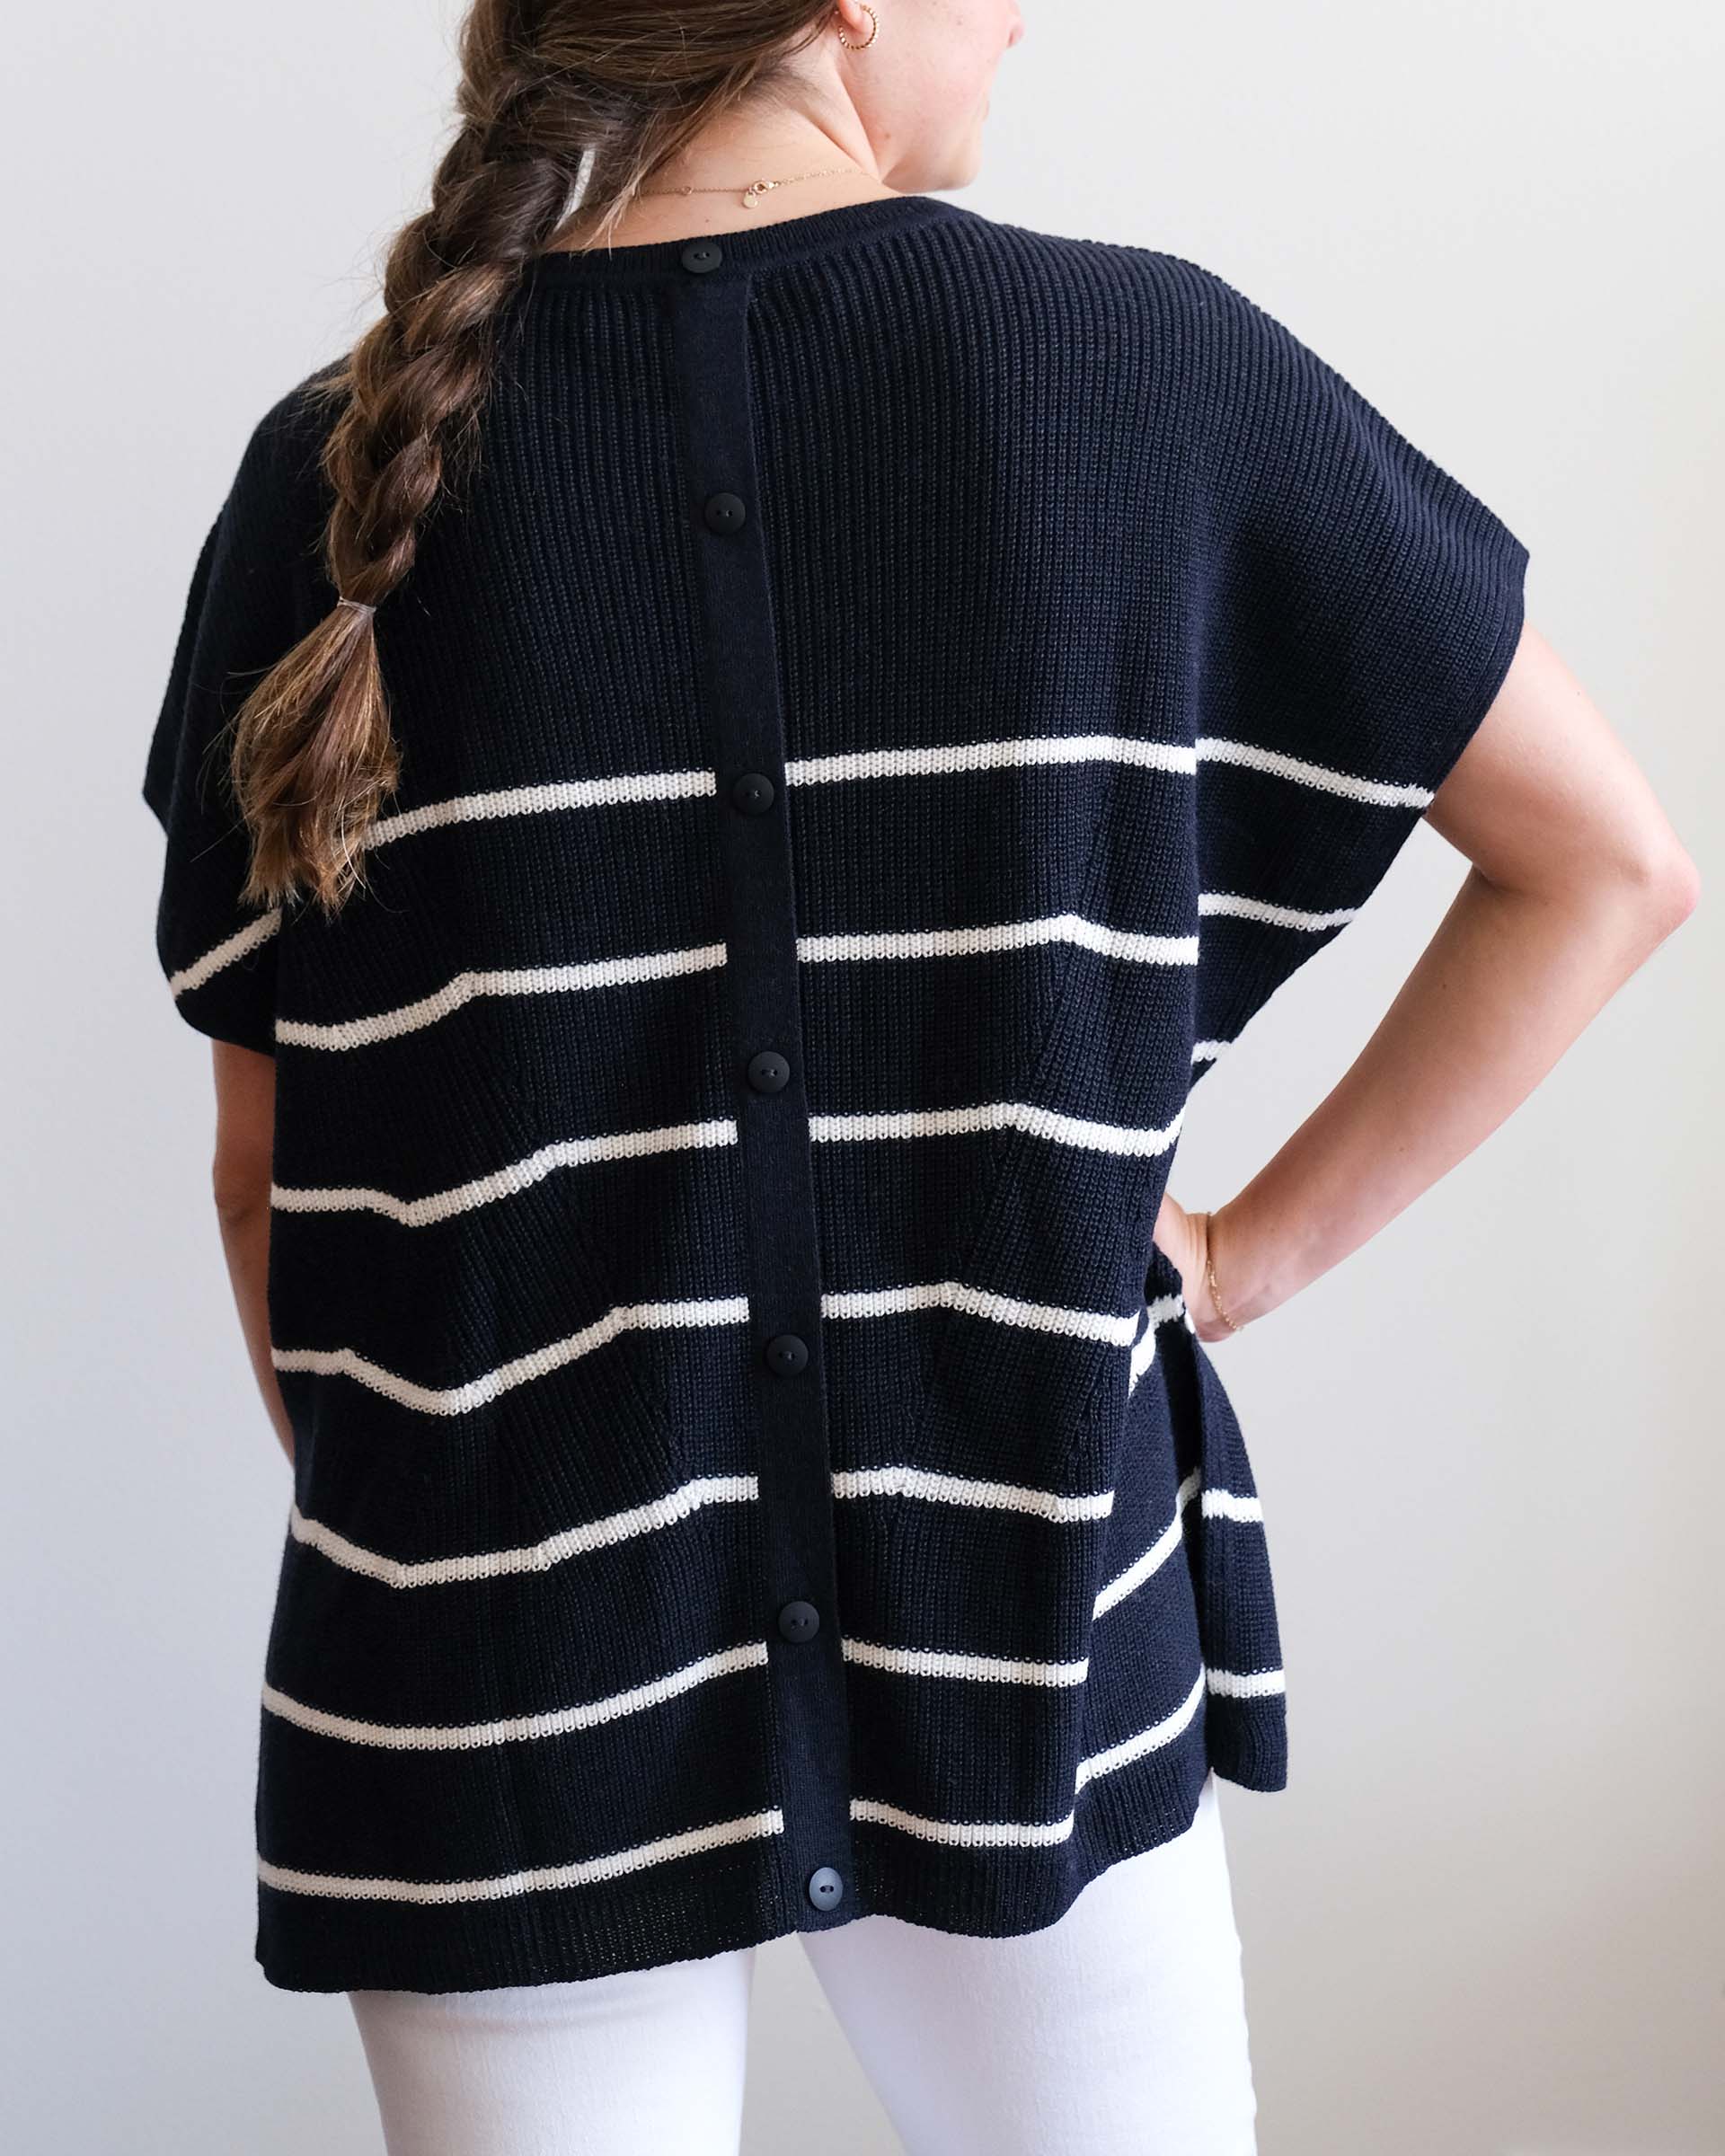 Women's One Size Navy Stripes Short Sleeve Sweater With Buttons Down Back Casual Day Outfit